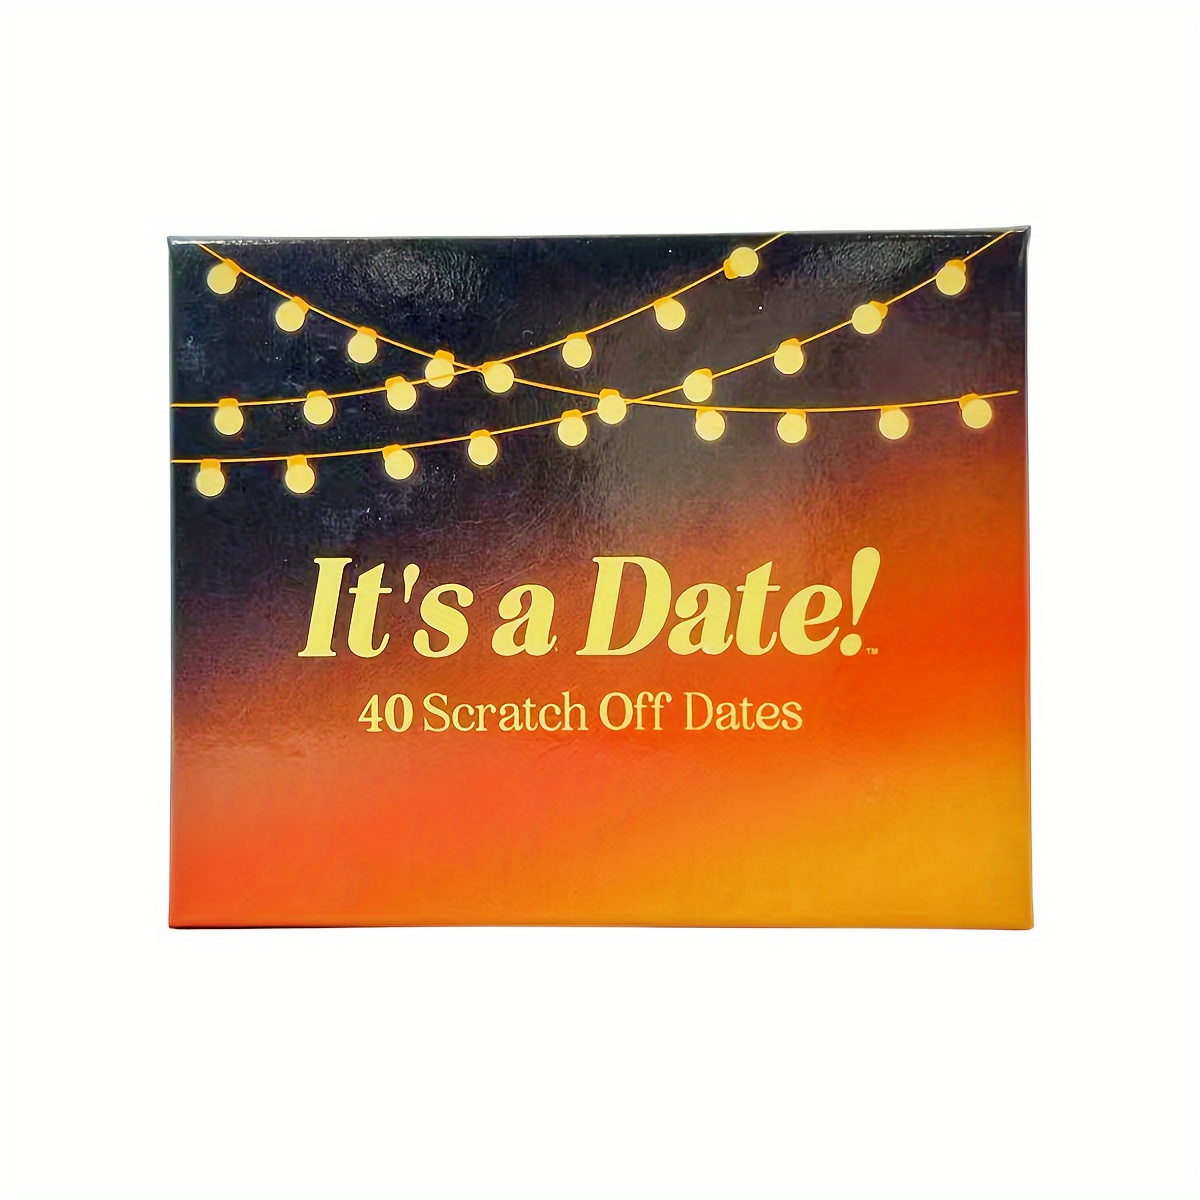 Romantic Couples Gift - Fun & Adventurous Date Night Box - Scratch Off Card  Game with Exciting Date Ideas for Couple: Girlfriend, Boyfriend, Newlywed